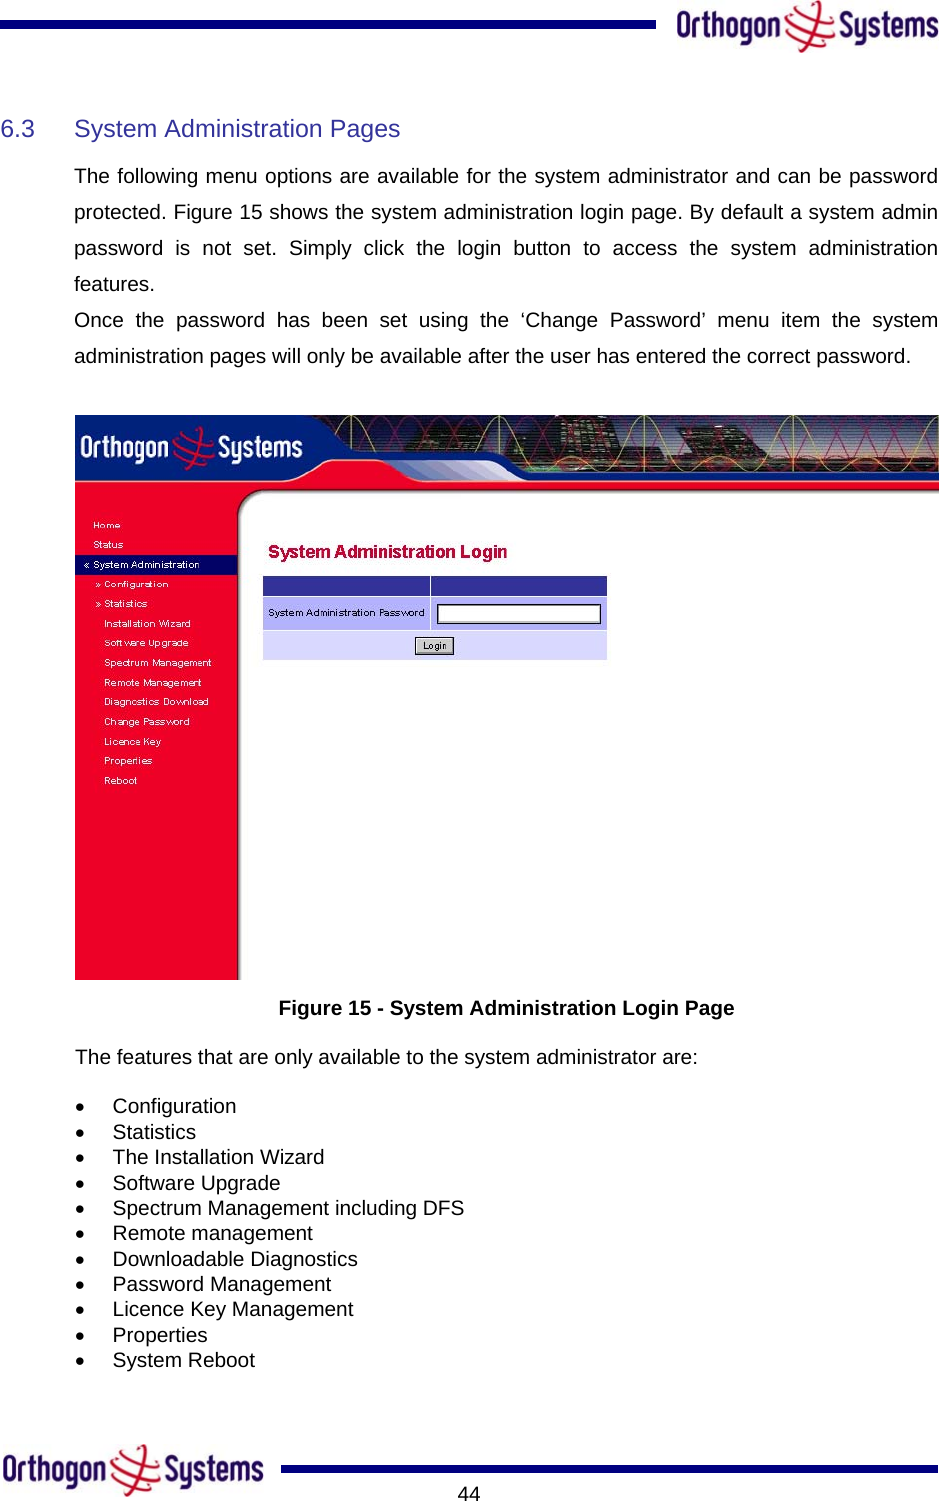       446.3  System Administration Pages  The following menu options are available for the system administrator and can be password protected. Figure 15 shows the system administration login page. By default a system admin password is not set. Simply click the login button to access the system administration features.  Once the password has been set using the ‘Change Password’ menu item the system administration pages will only be available after the user has entered the correct password.   Figure 15 - System Administration Login Page The features that are only available to the system administrator are: •  Configuration •  Statistics •  The Installation Wizard •  Software Upgrade •  Spectrum Management including DFS •  Remote management •  Downloadable Diagnostics •  Password Management •  Licence Key Management •  Properties •  System Reboot 